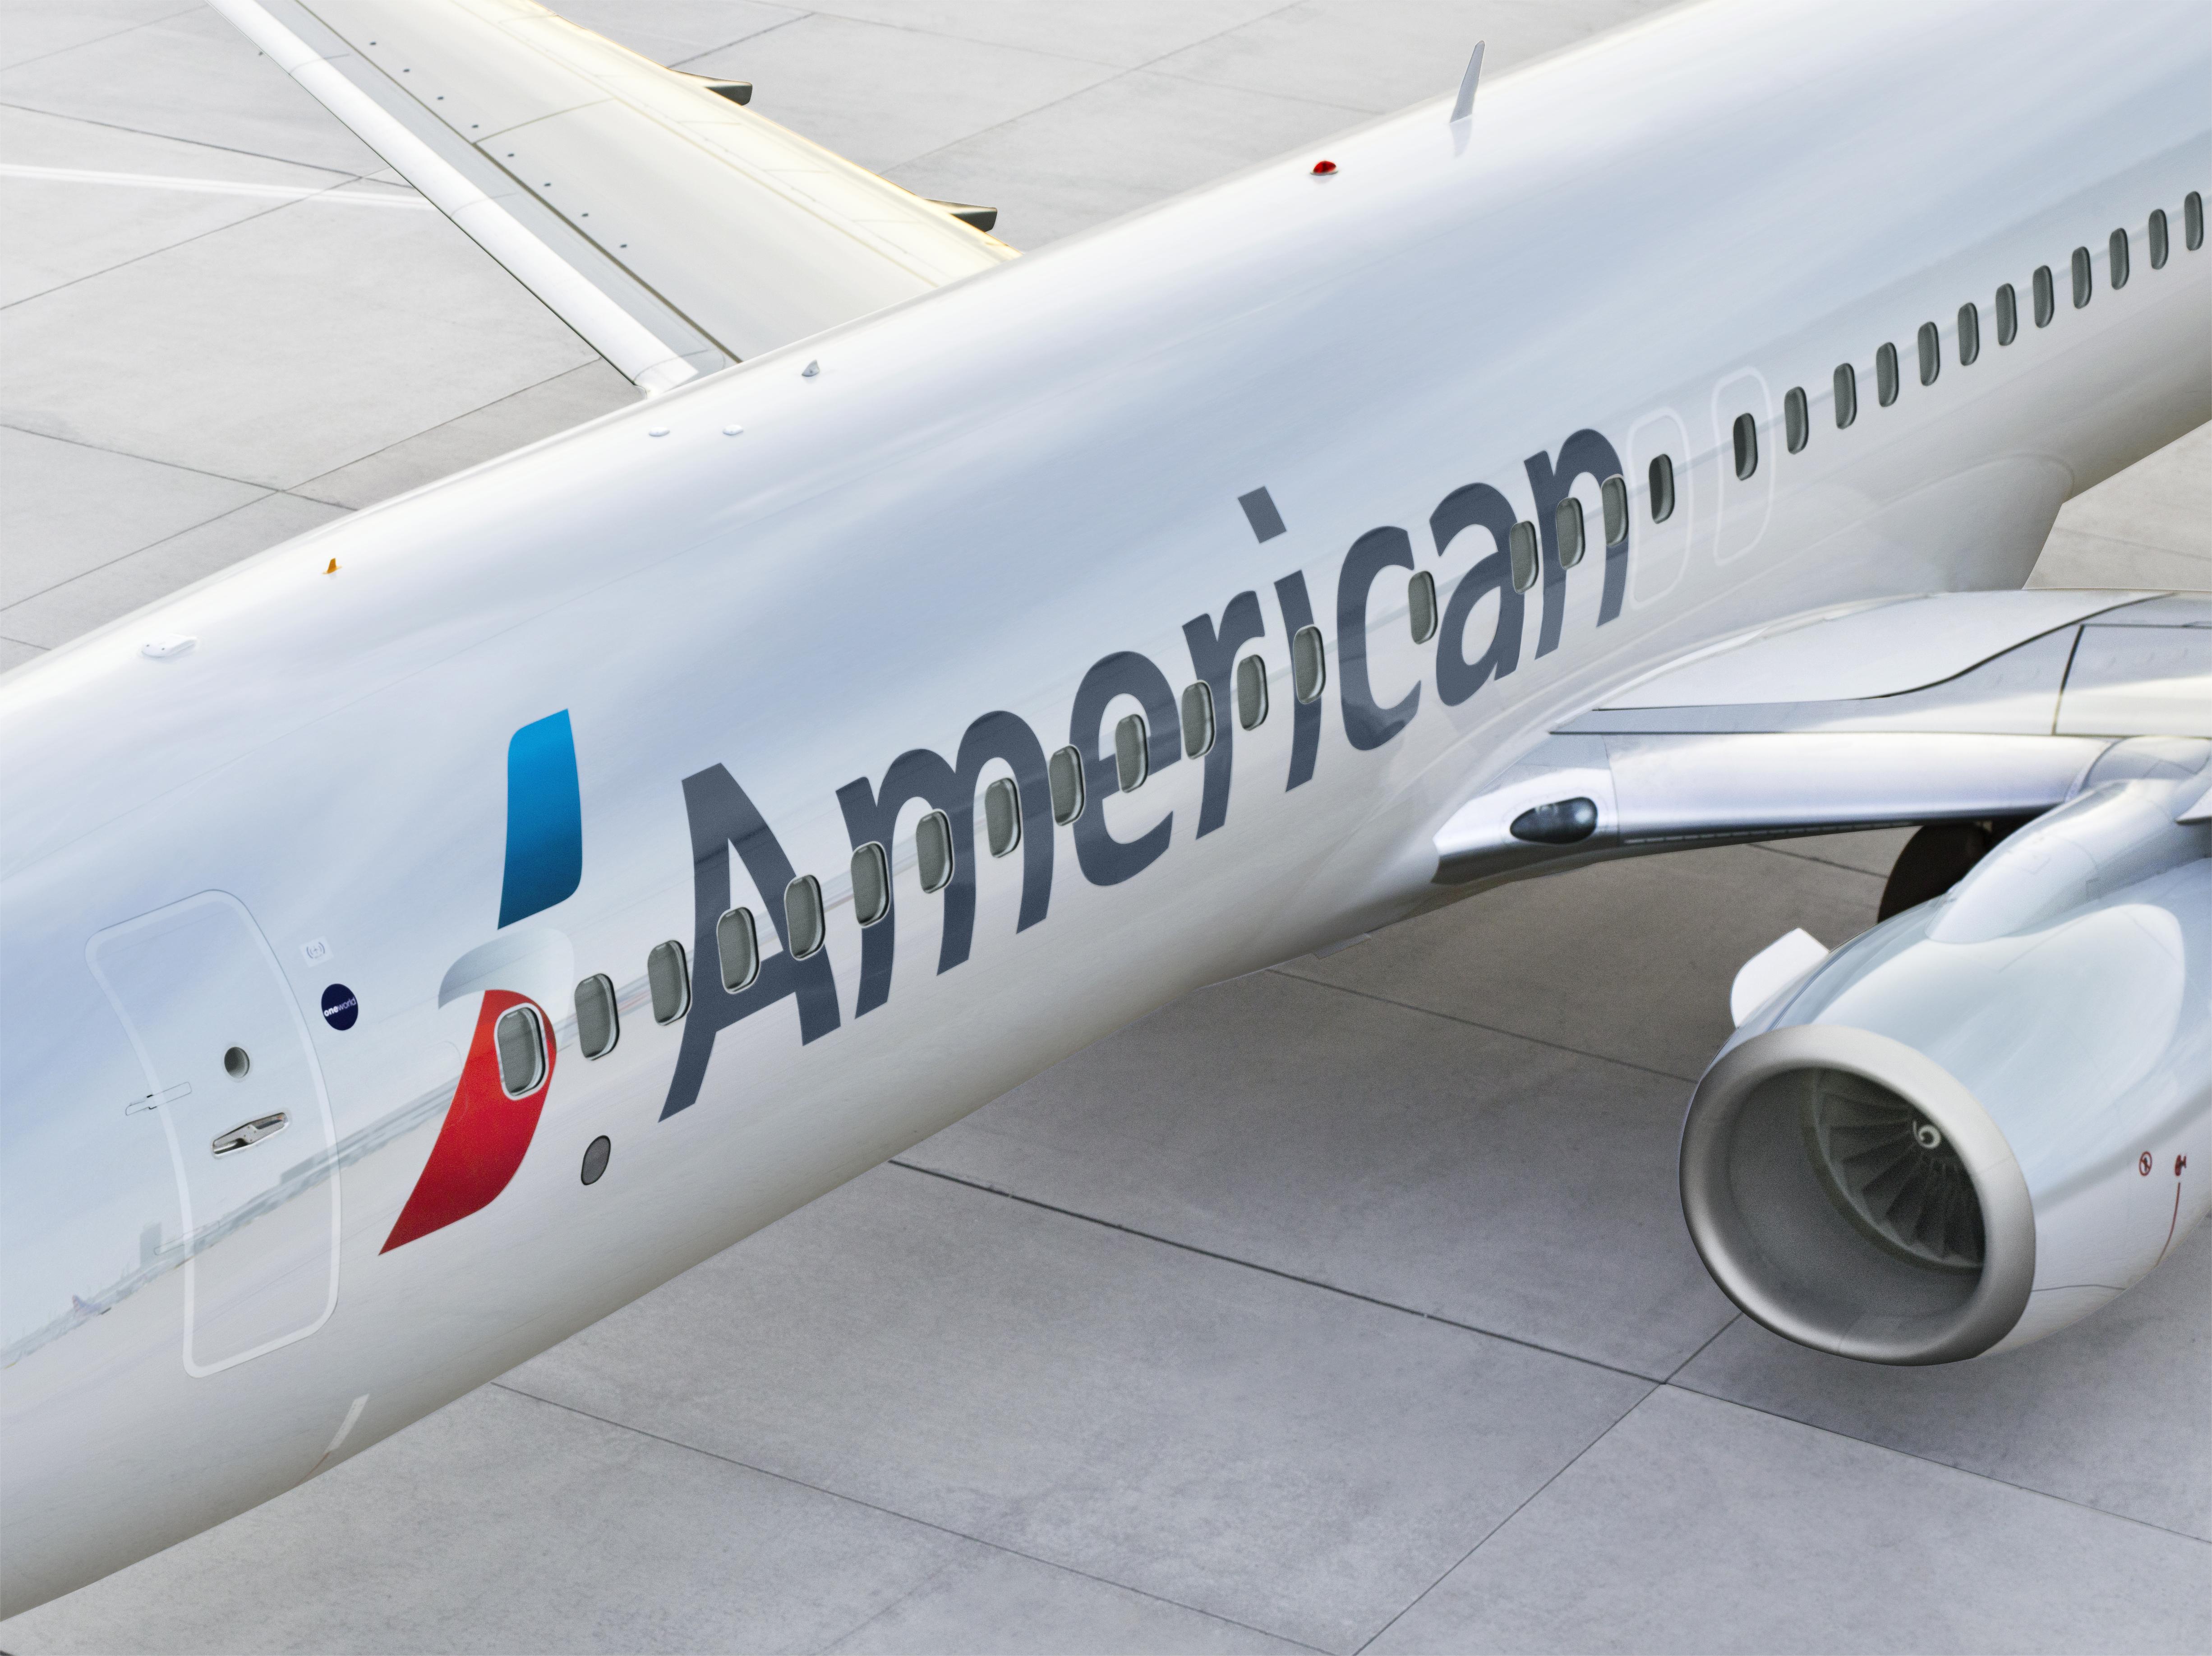 Earn 4,000 American Airline Miles with a Hotel Reservation!